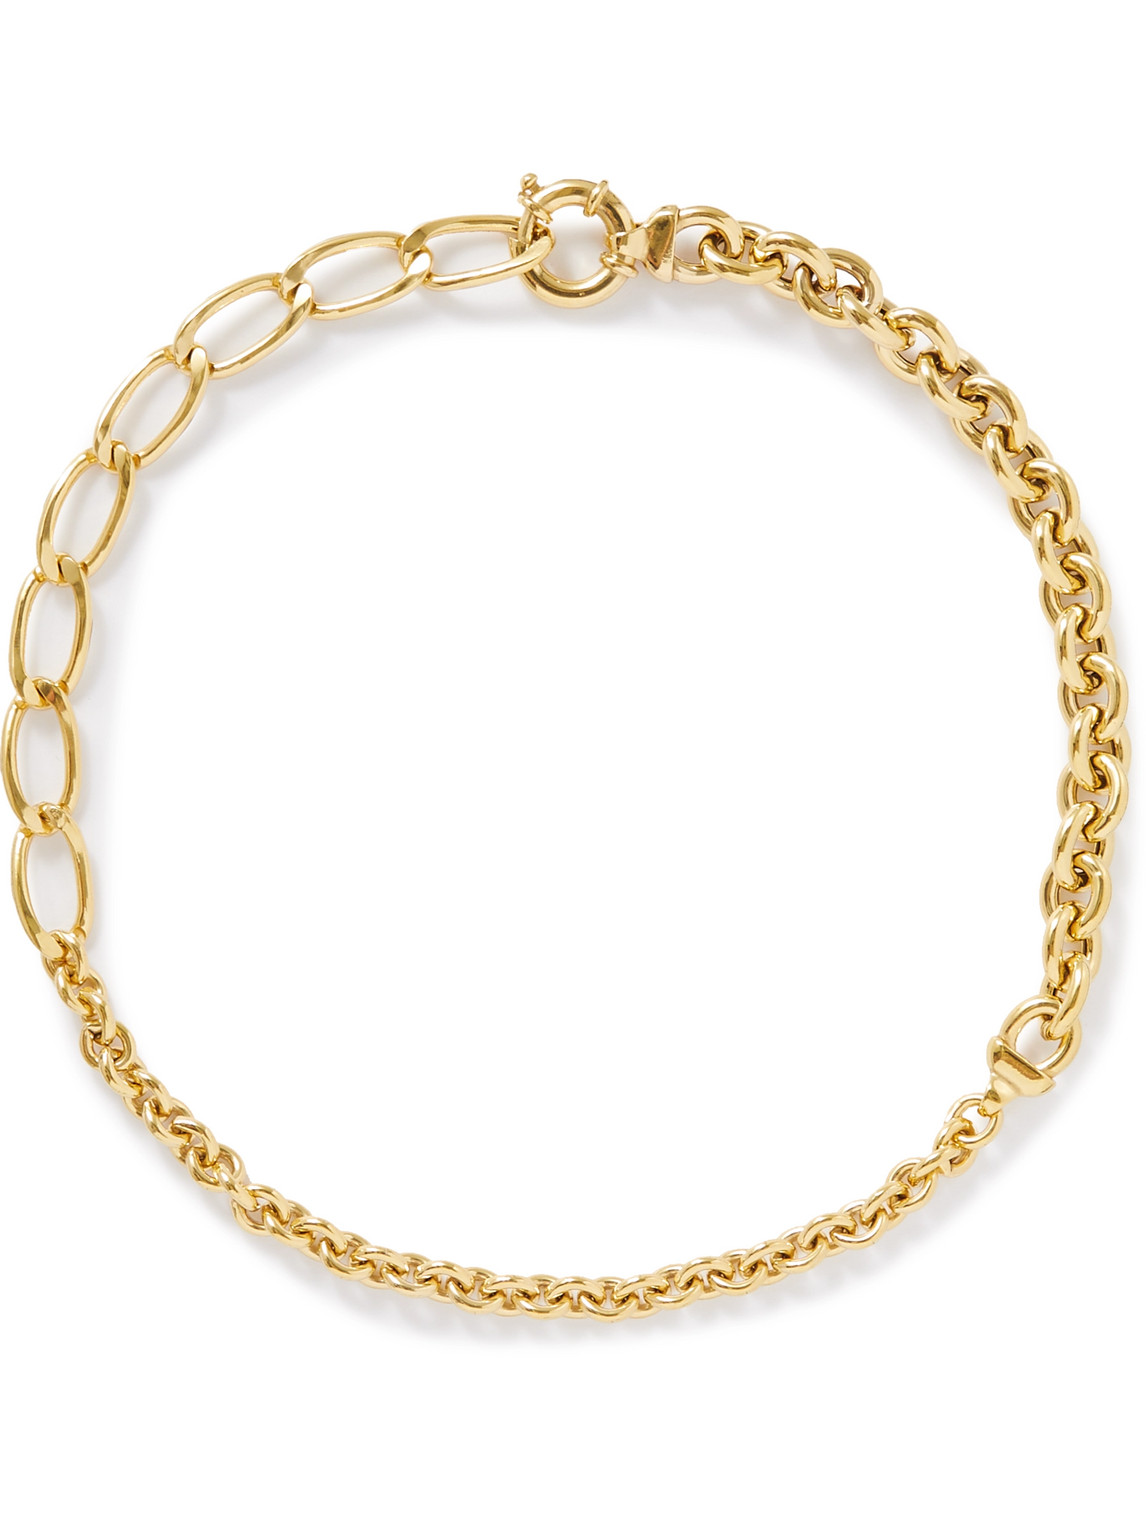 Trilogy 24-Karat Gold-Plated Chain Necklace